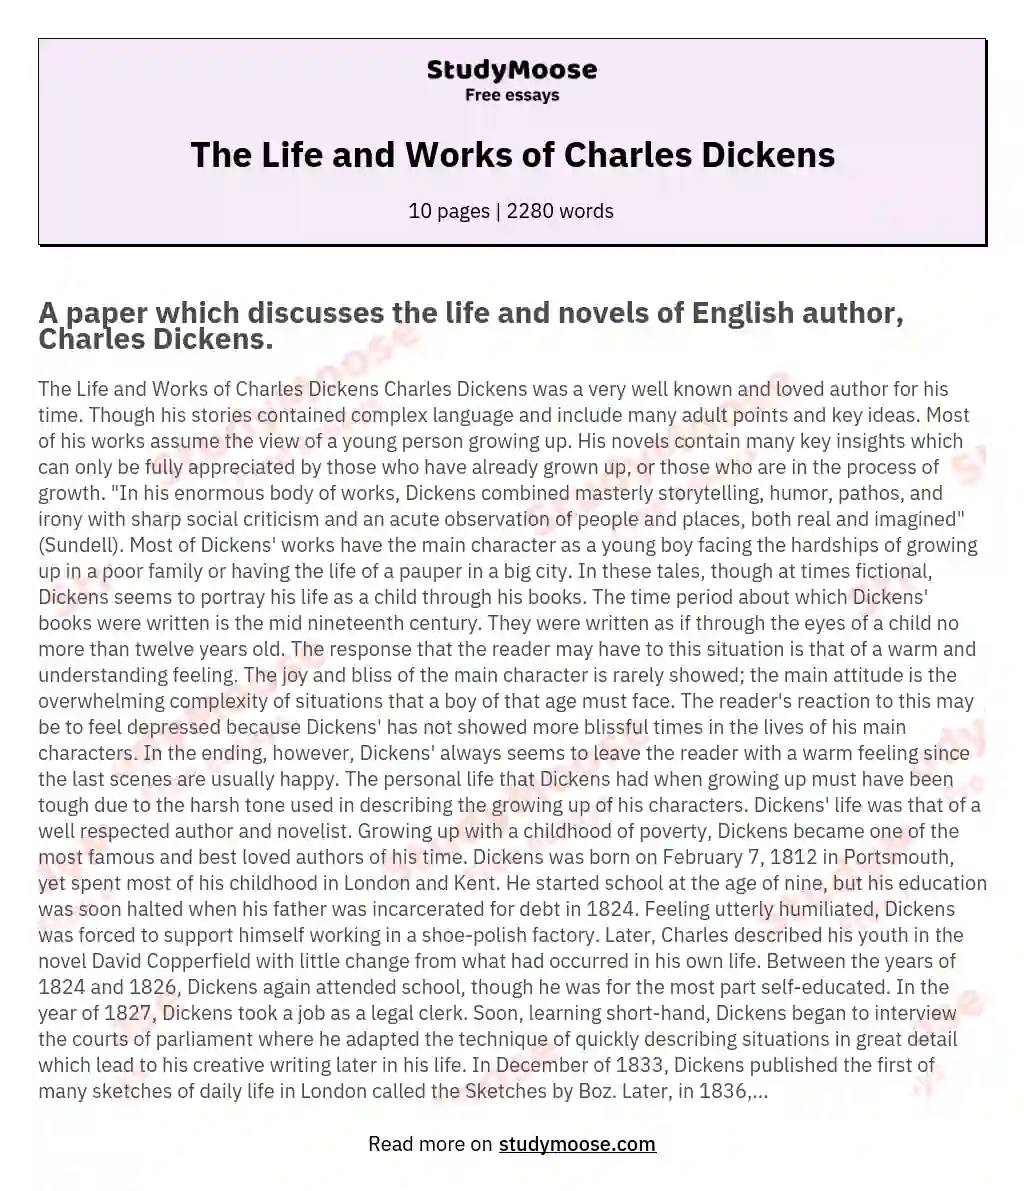 The Life and Works of Charles Dickens